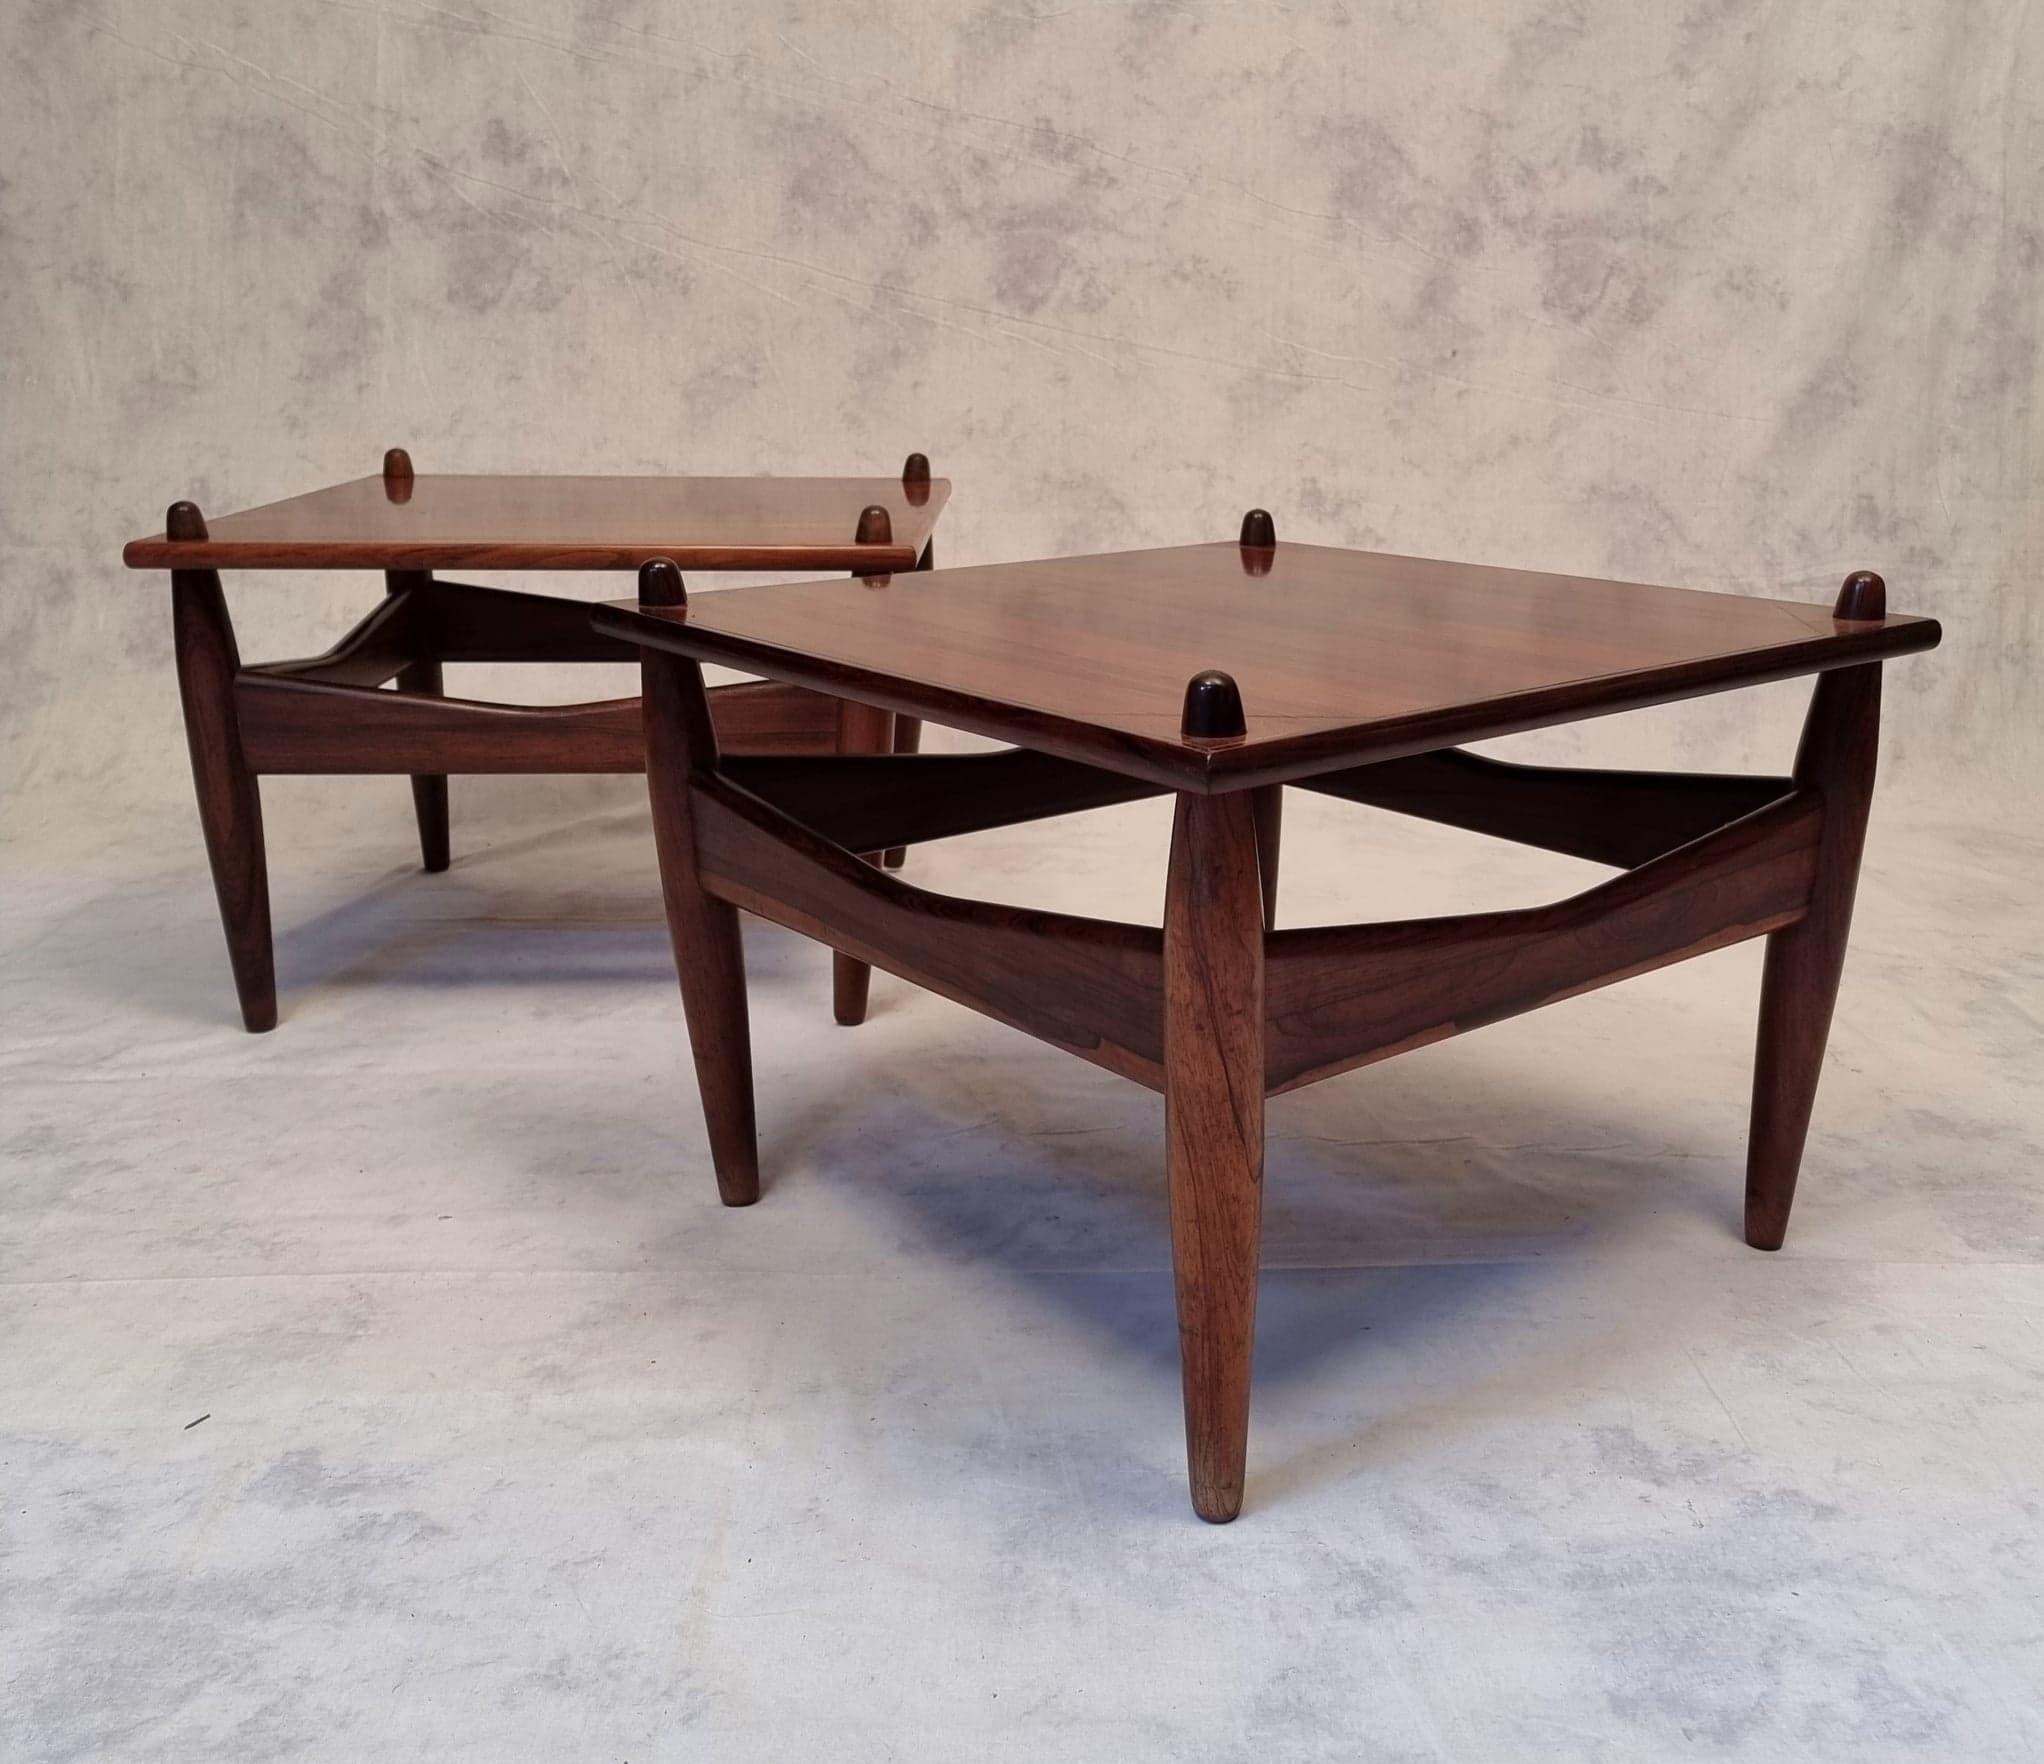 Inlay Pair Of Side Tables By Illum Wikkelsø – N°272, Rosewood, Ca 1950 For Sale